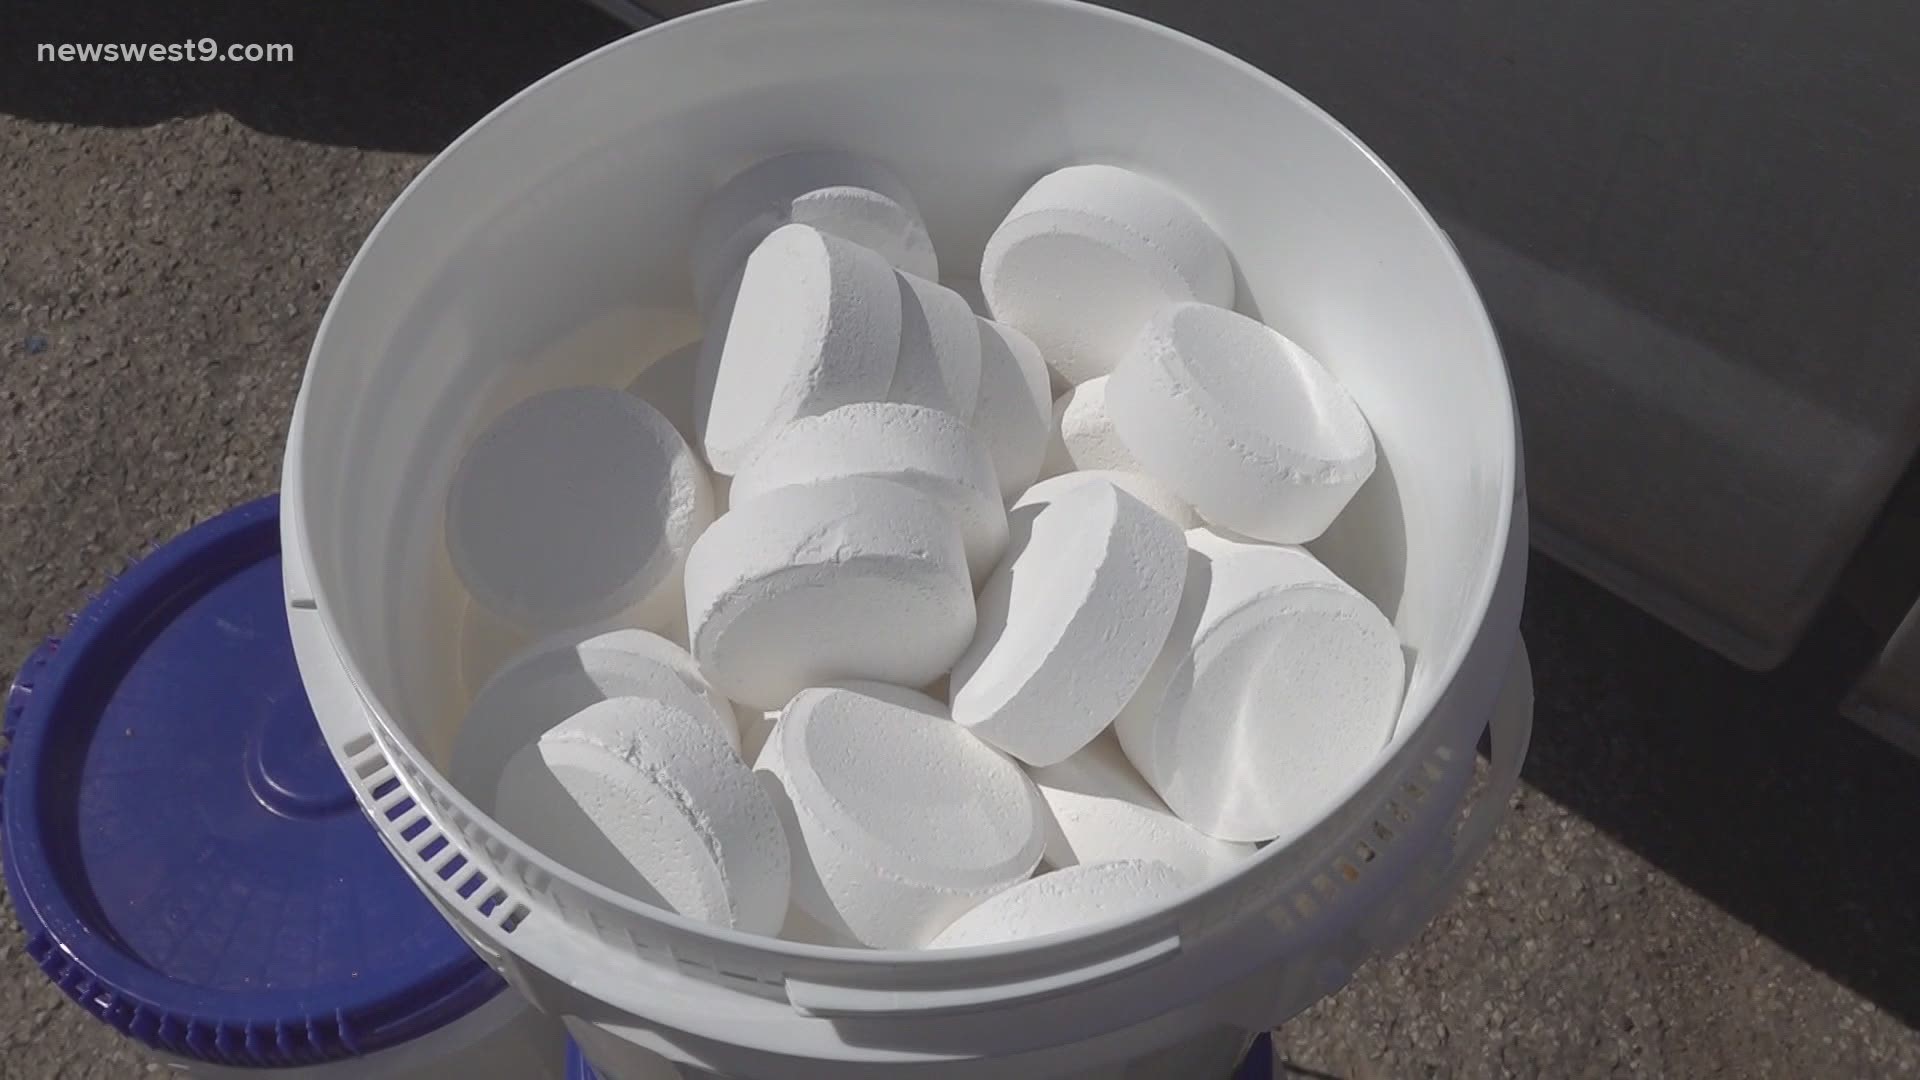 Local pool supply shops are experiencing a shortage of chlorine tablets used to clean pools, and they worry that the shortage could run into next year.